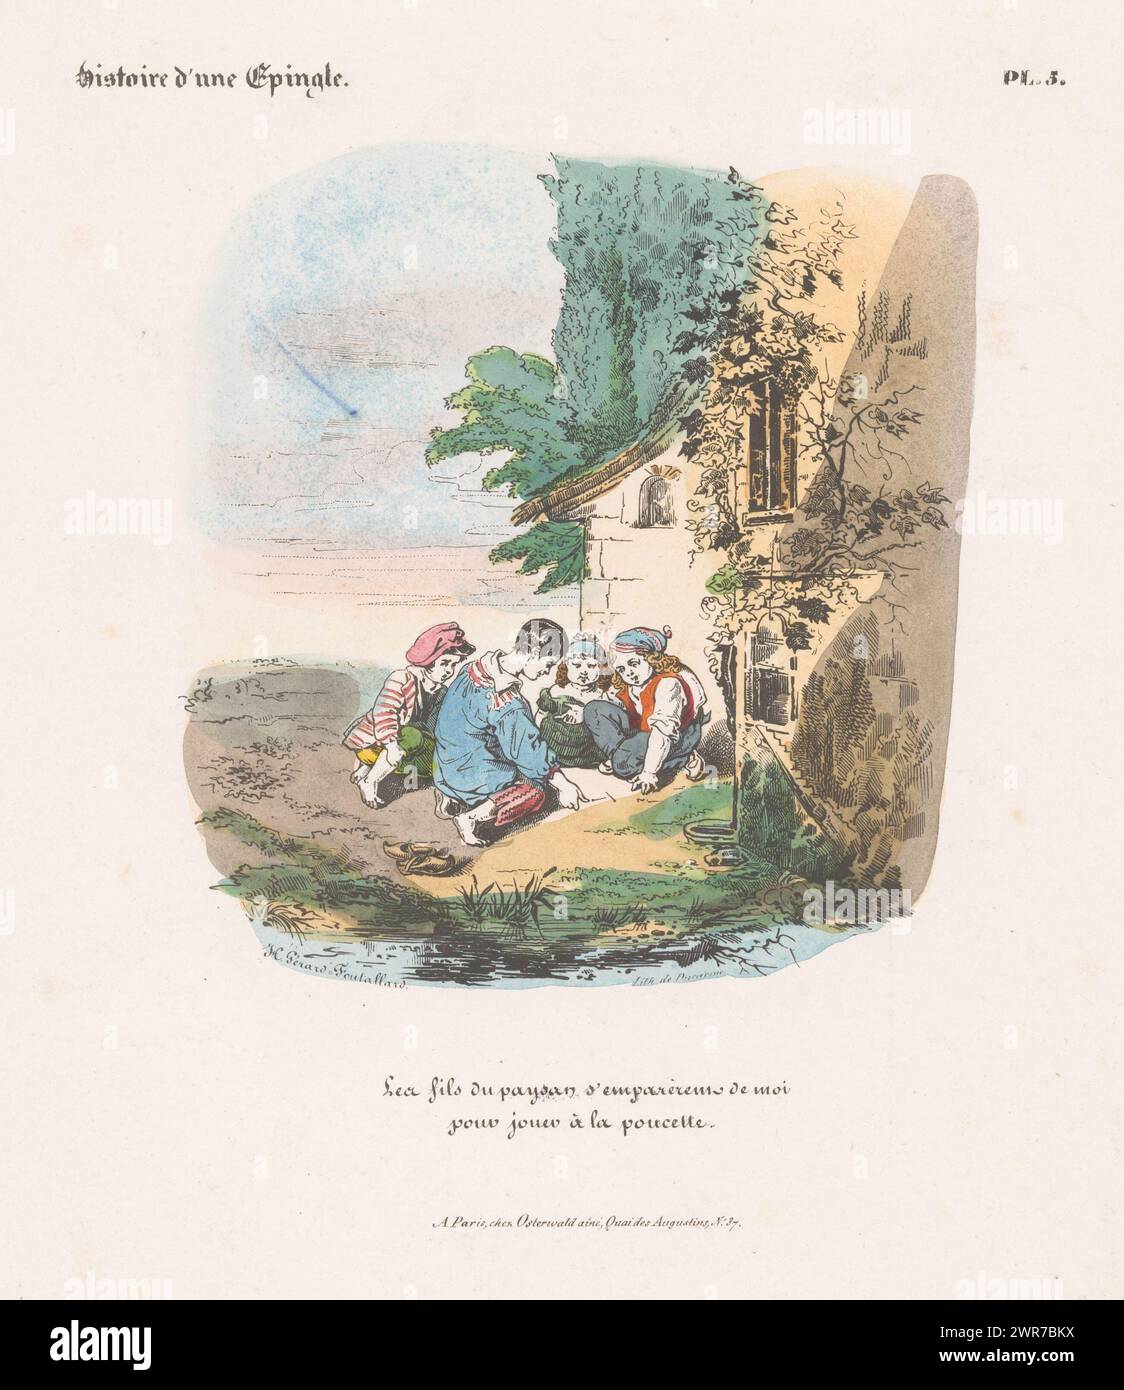 Four farm boys playing with pins, Fashion accessories with a story (series title), Histoire d'une épingle (series title on object), print maker: Henri-Gérard Fontallard, printer: Pierre François Ducarme, publisher: Jean Fréderic Ostervald, Paris, 1828, paper, height 377 mm × width 284 mm, print Stock Photo